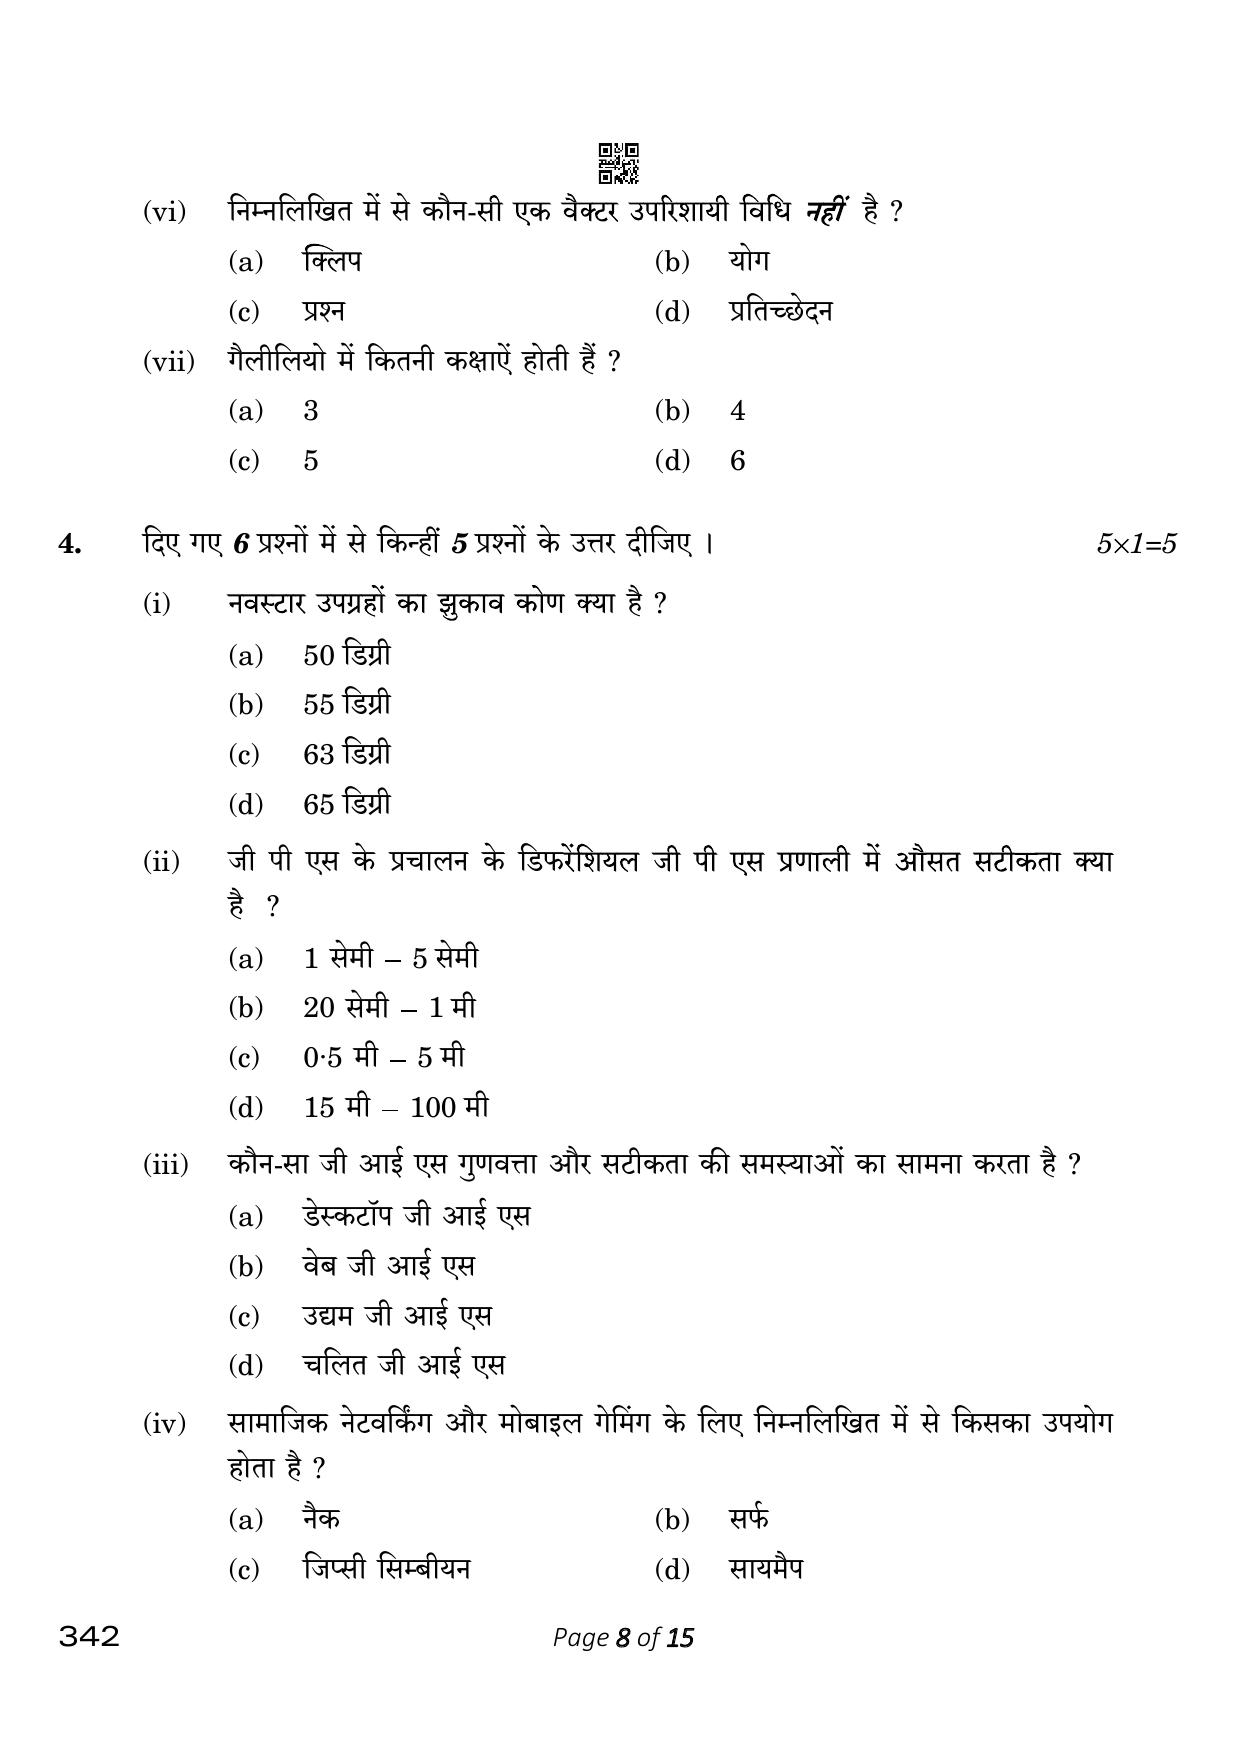 CBSE Class 12 342_Geospatial Technology 2023 Question Paper - Page 8